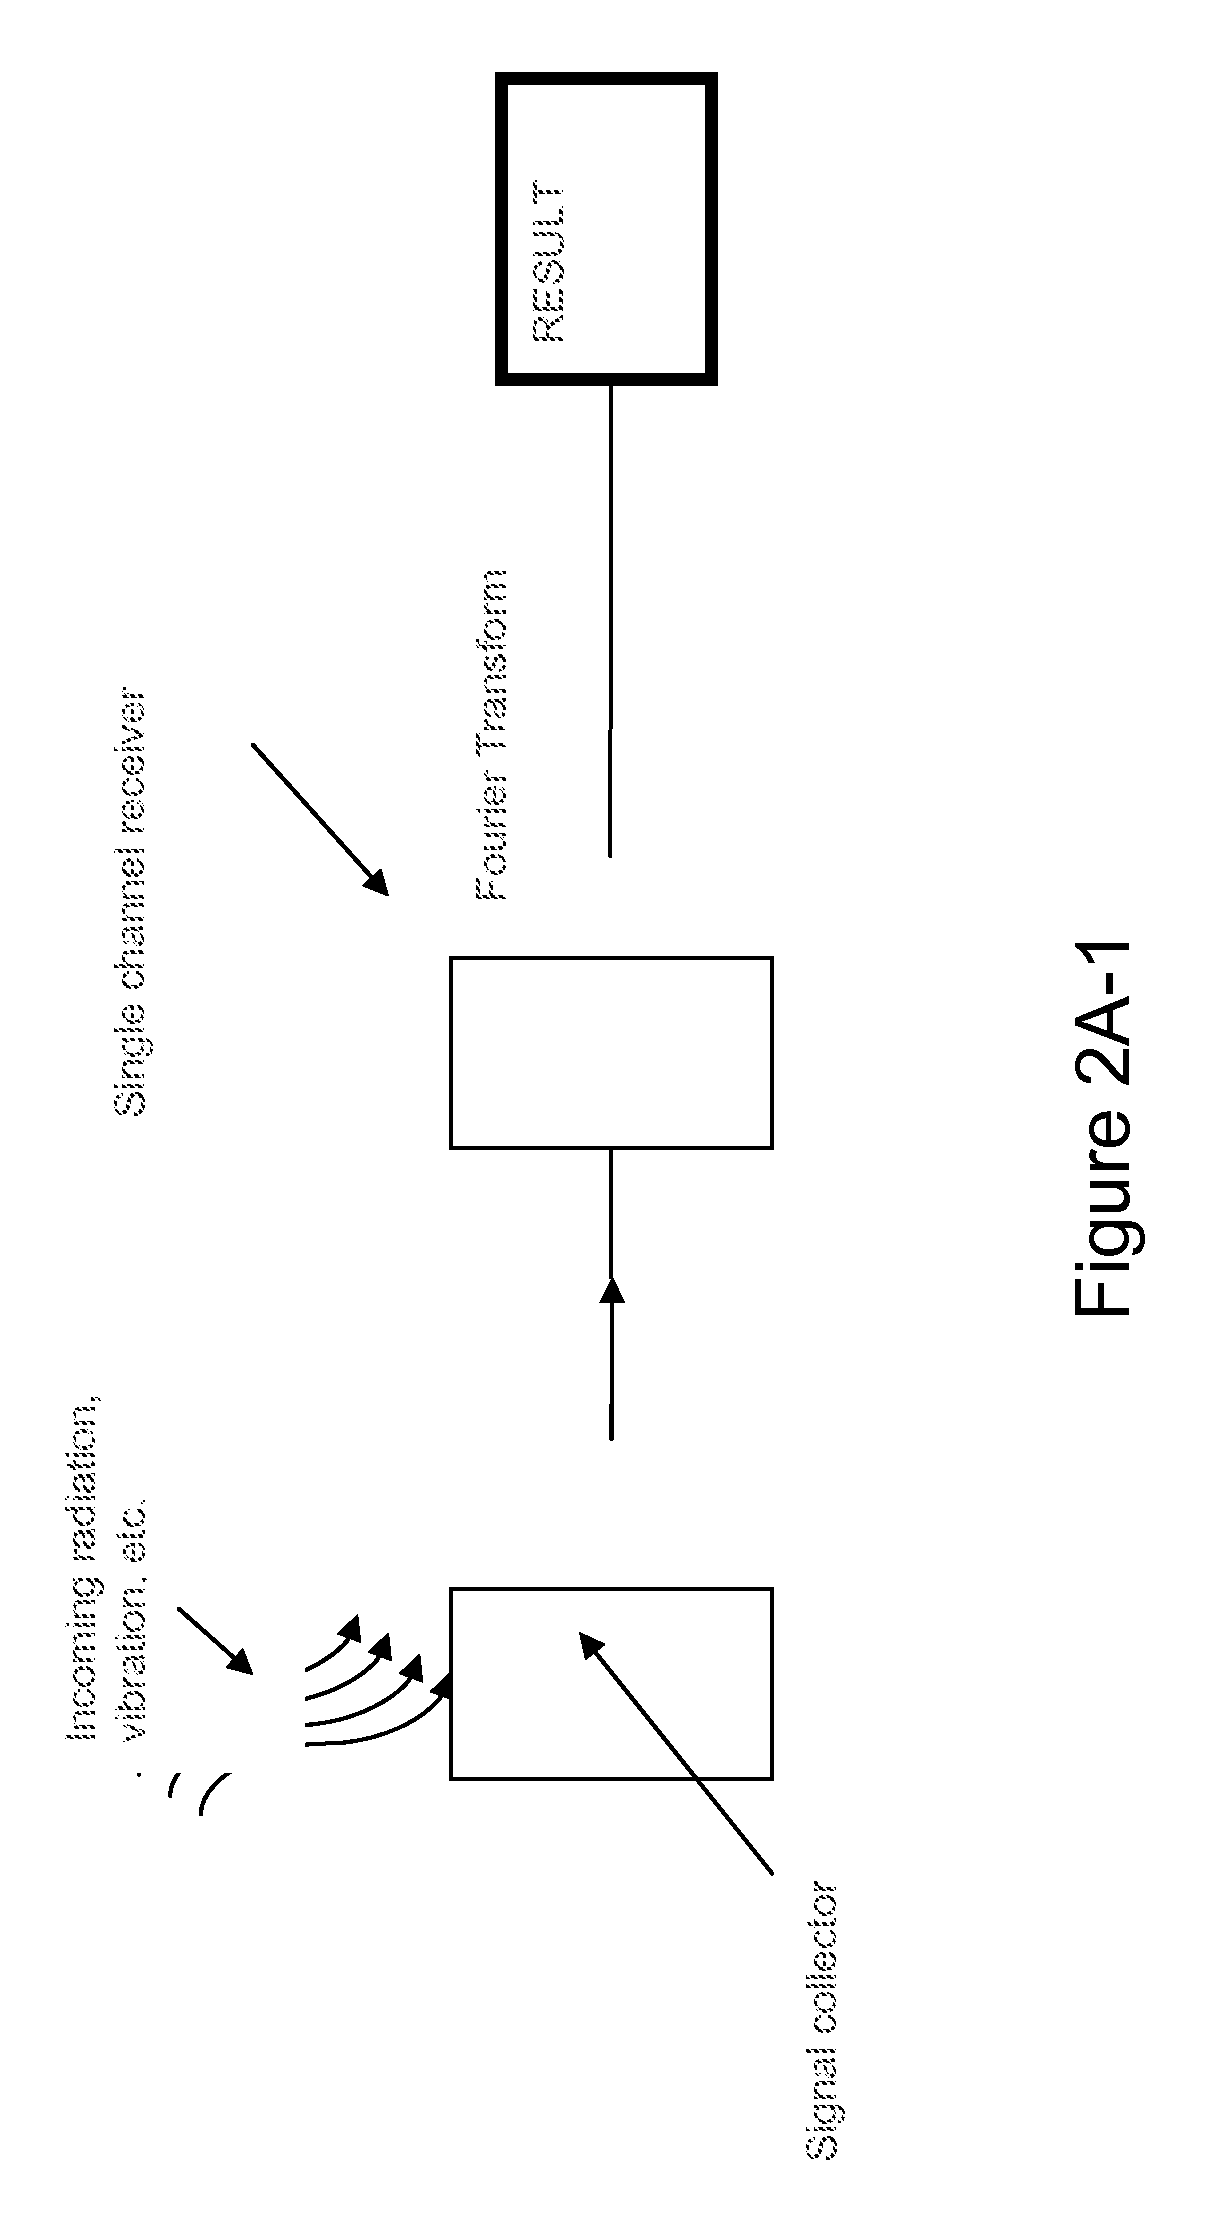 Noise Reduction Apparatus, Systems, and Methods